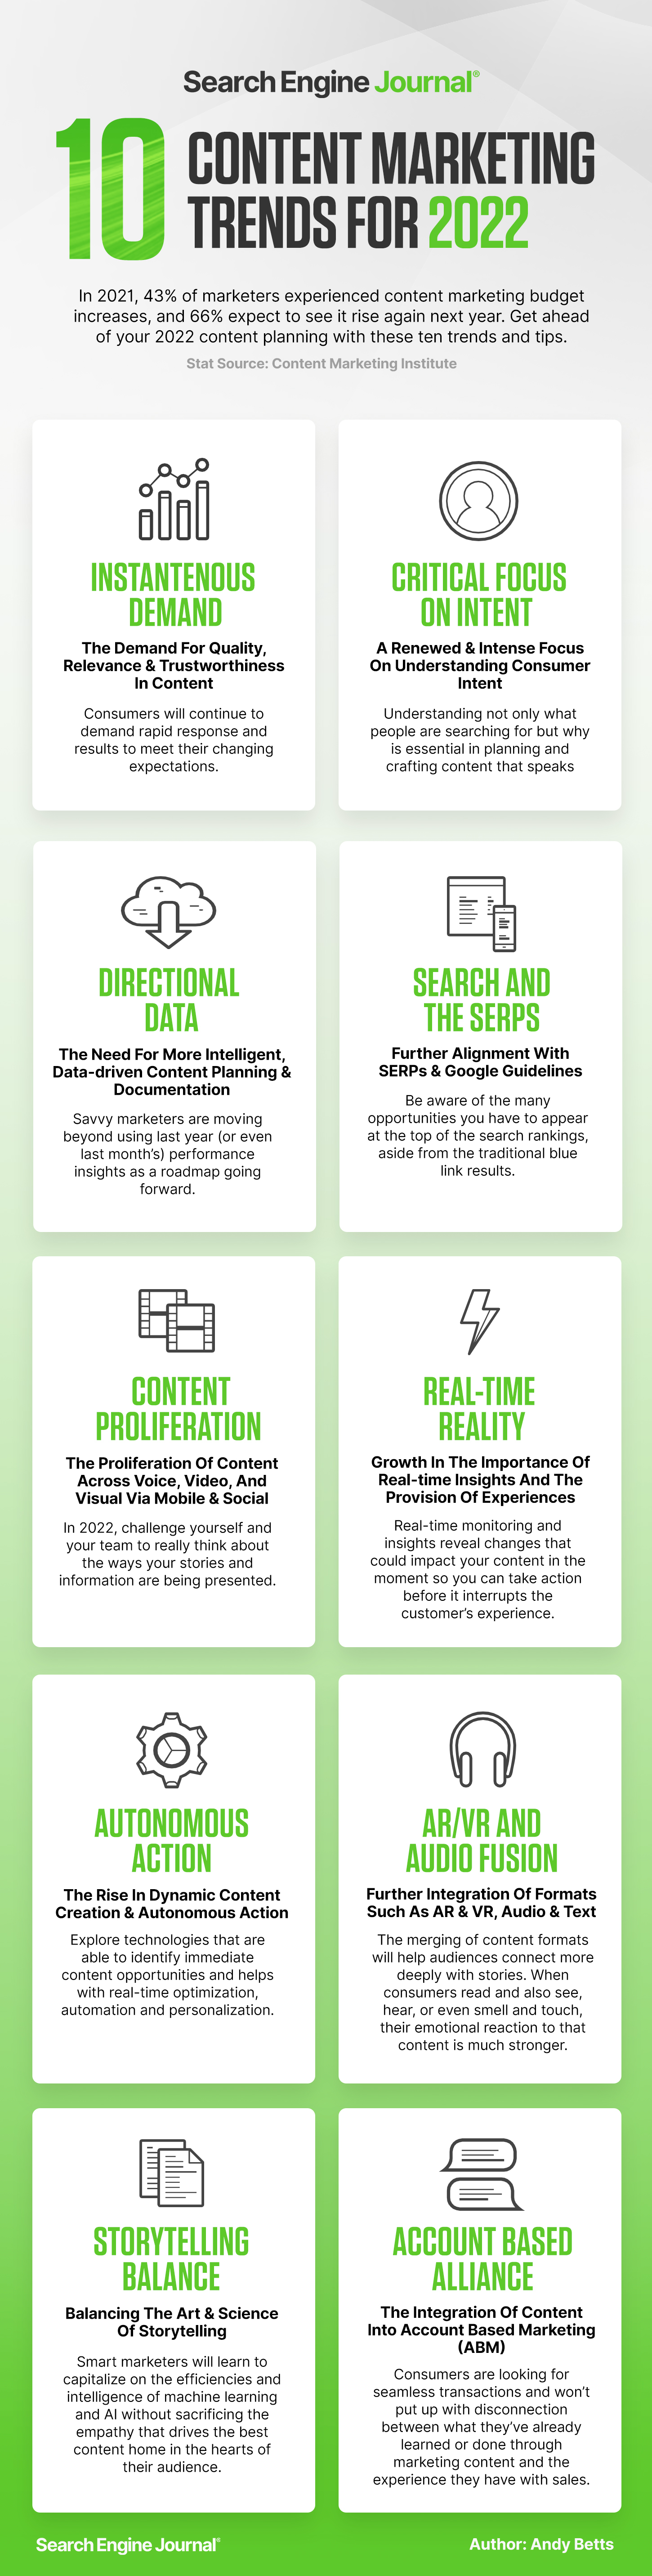 Content Marketing in 2022 Top 10 Trends - Img 1